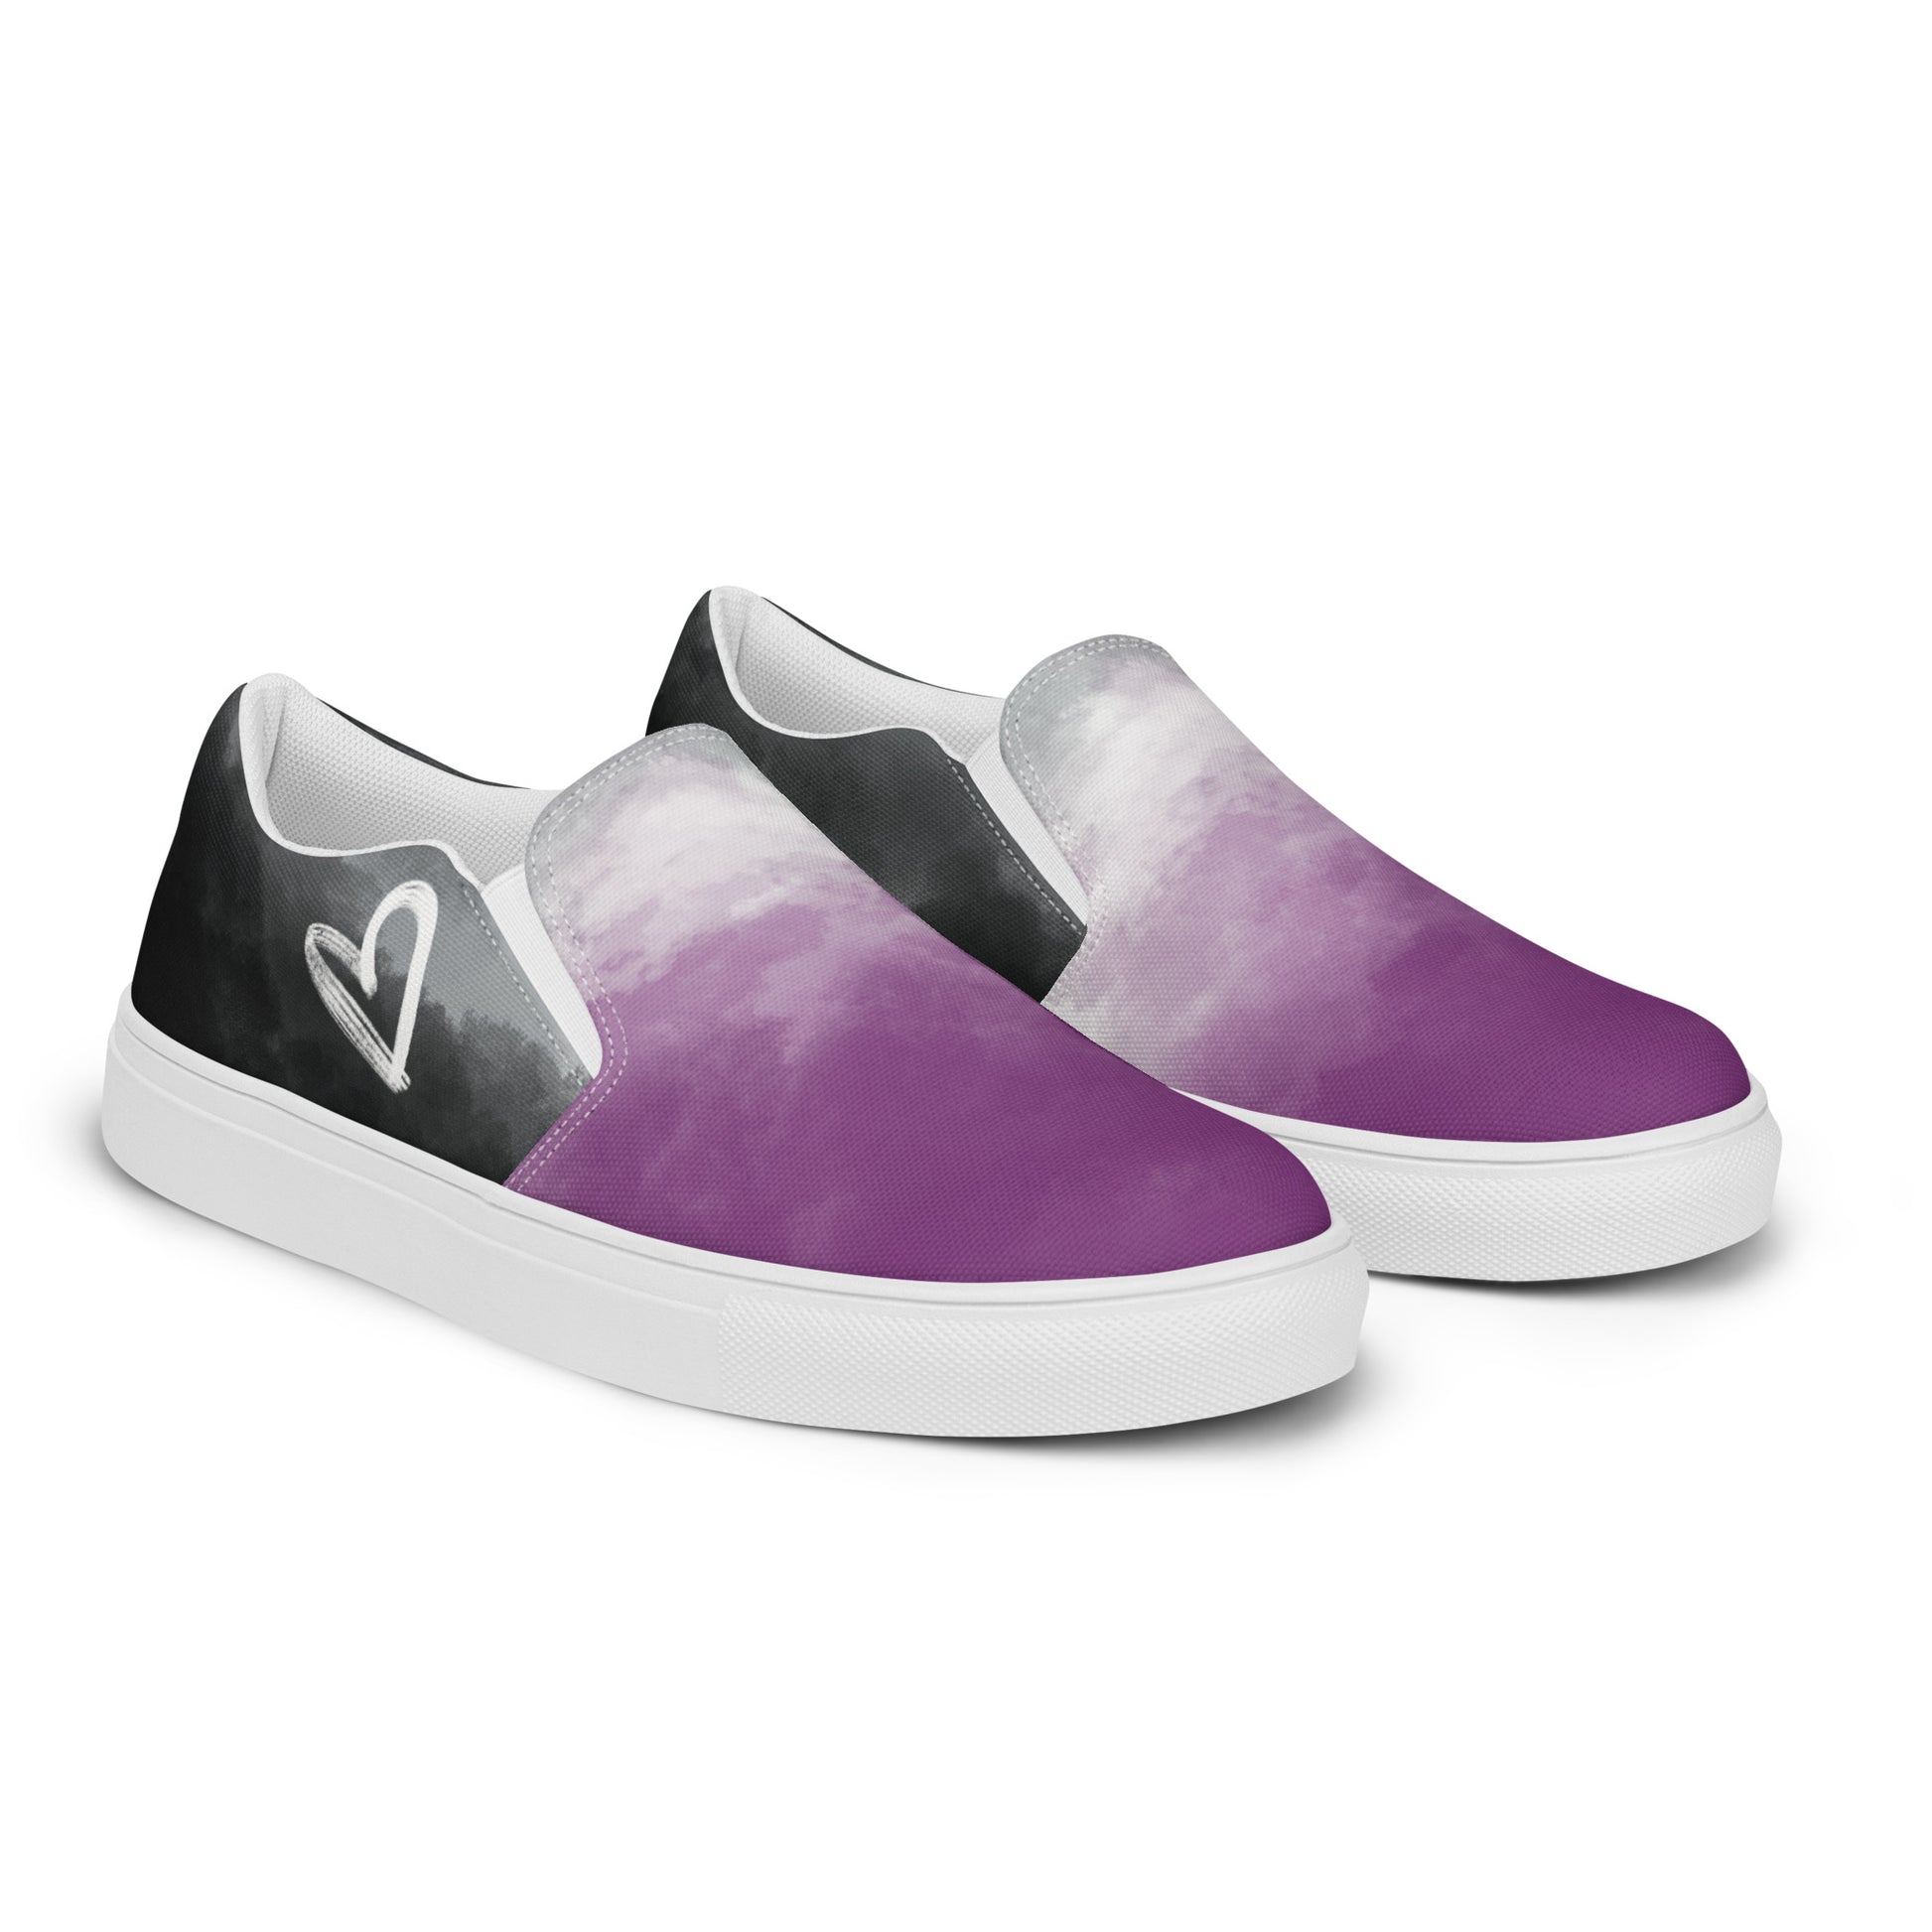 Right front view: A pair of slip-on shoes with clouds in the asexual flag colors, a hand drawn white heart on the side, and the Aras Sivad Studio logo on the back.